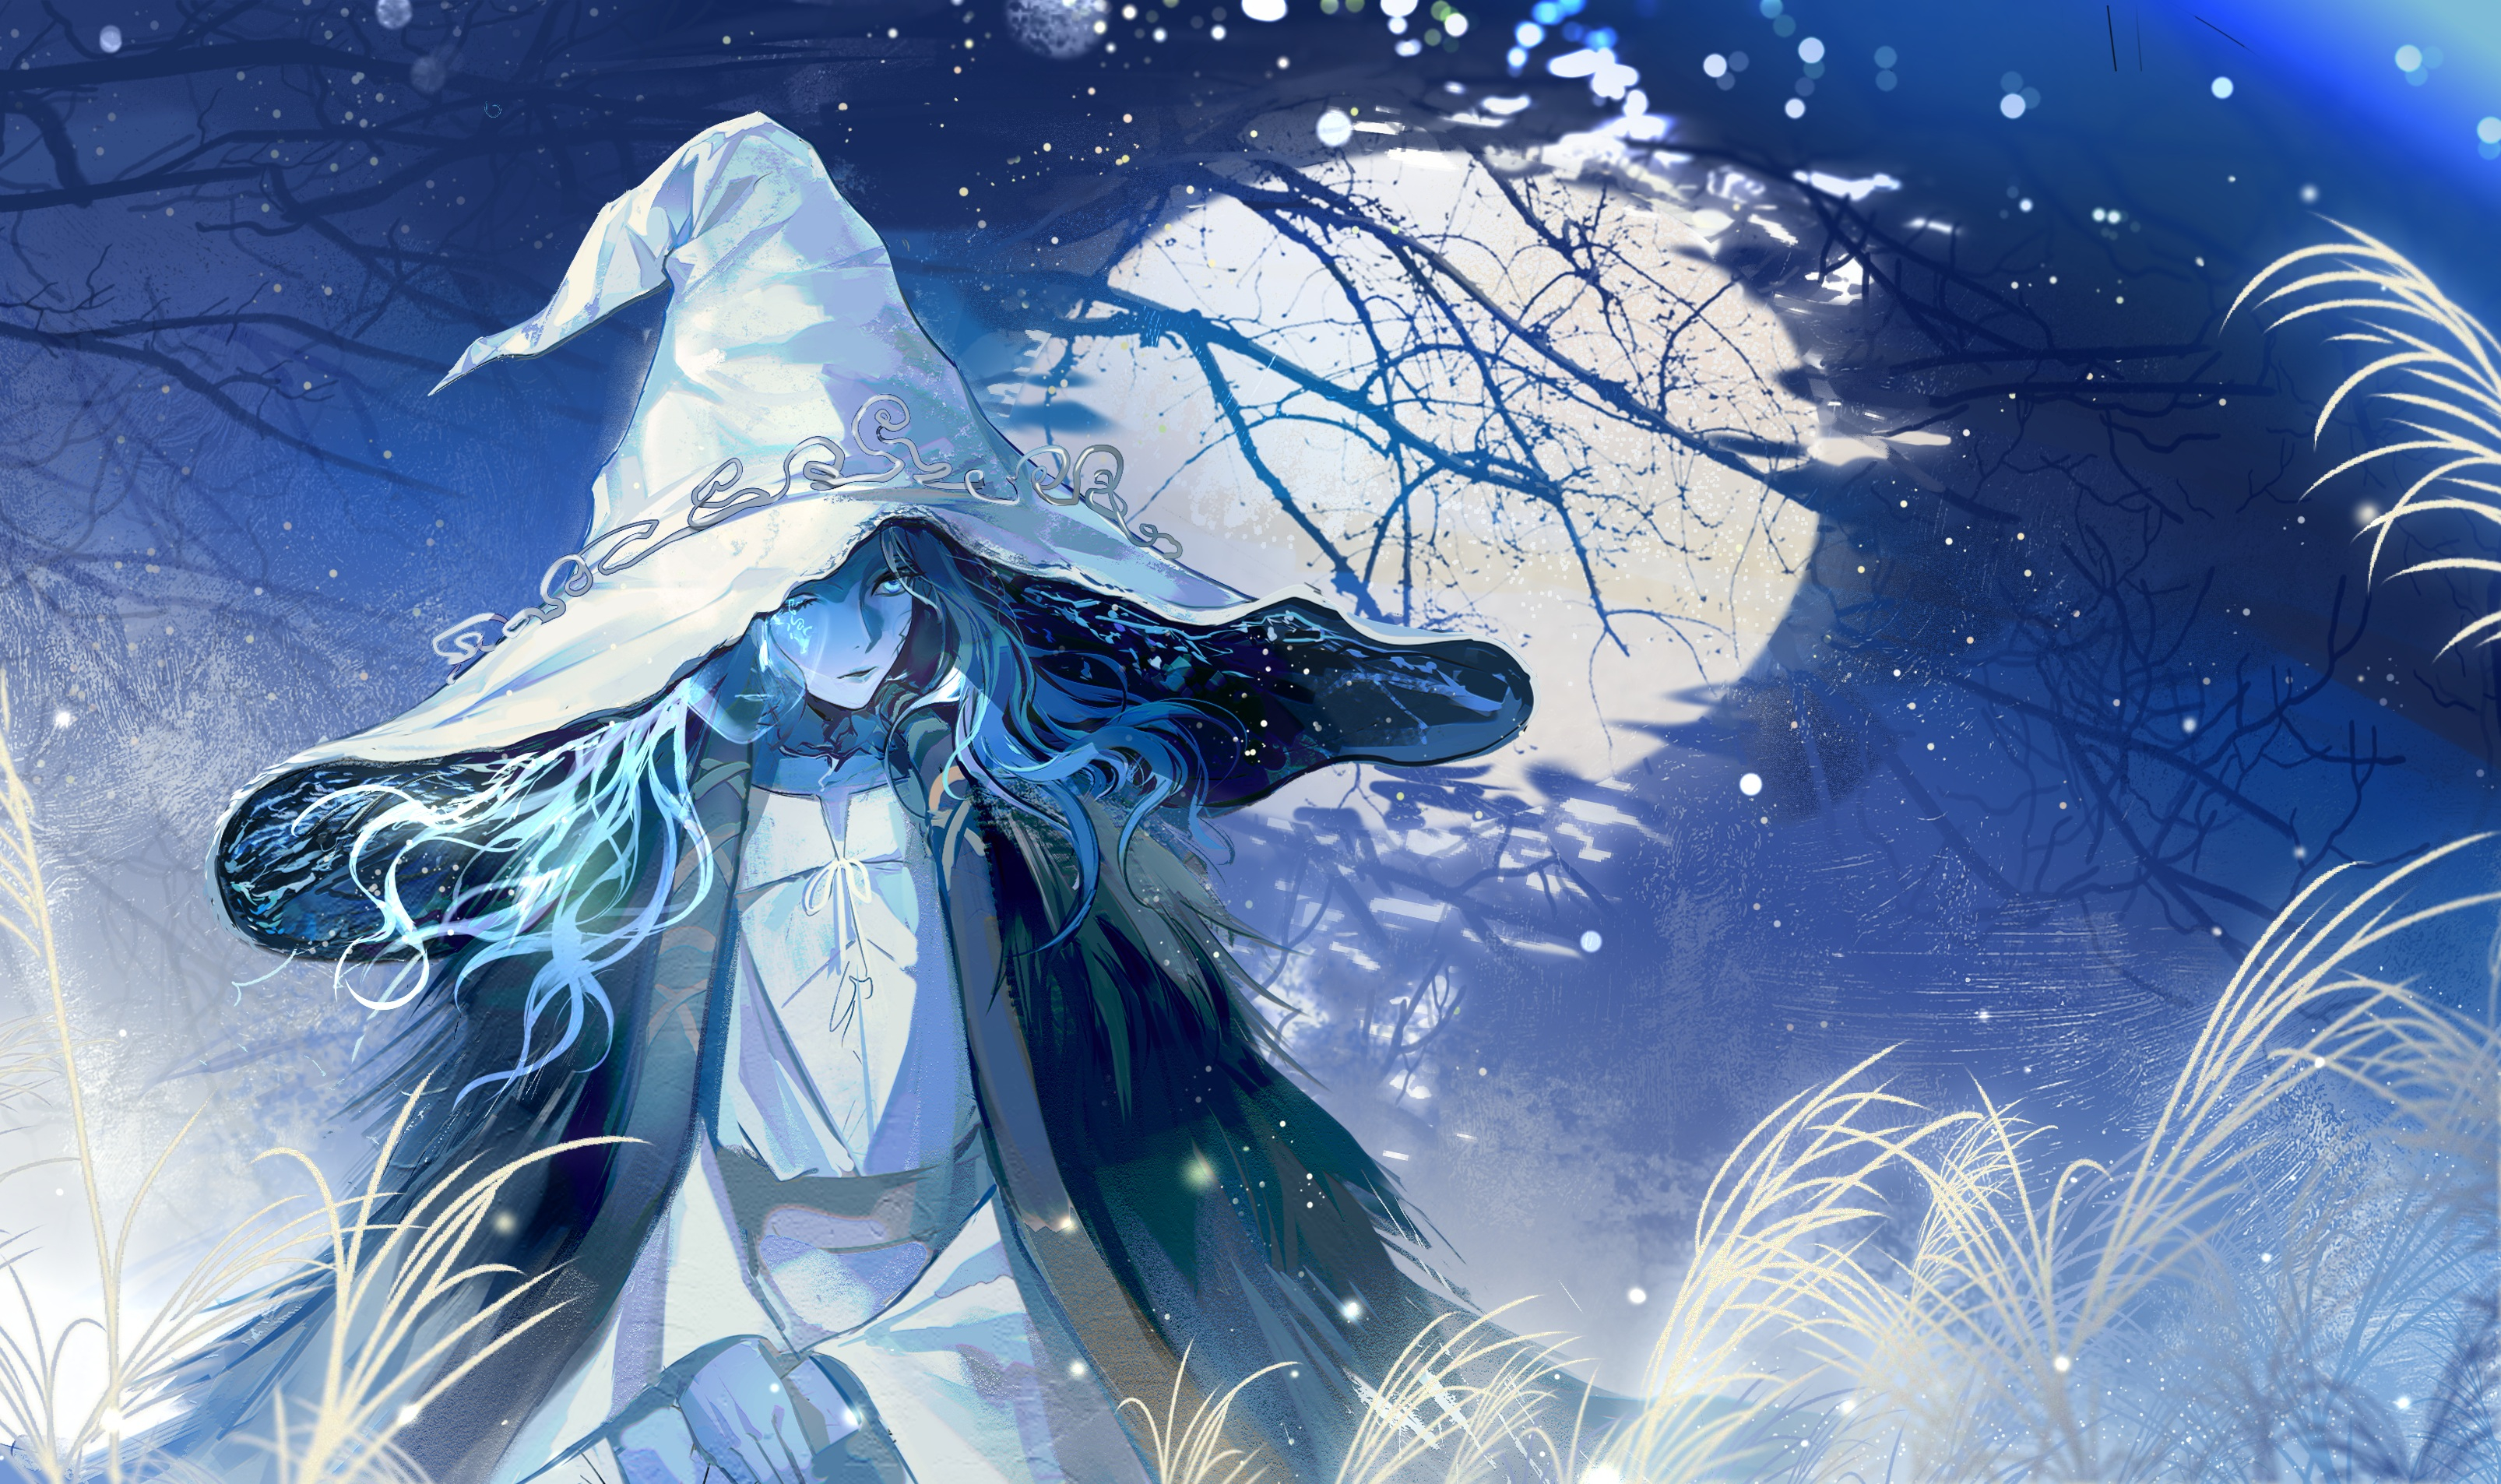 Download 2560x1700 Ranni The Witch, Elden Ring, Anime Style, Moonlight Wallpaper for Chromebook Pixel